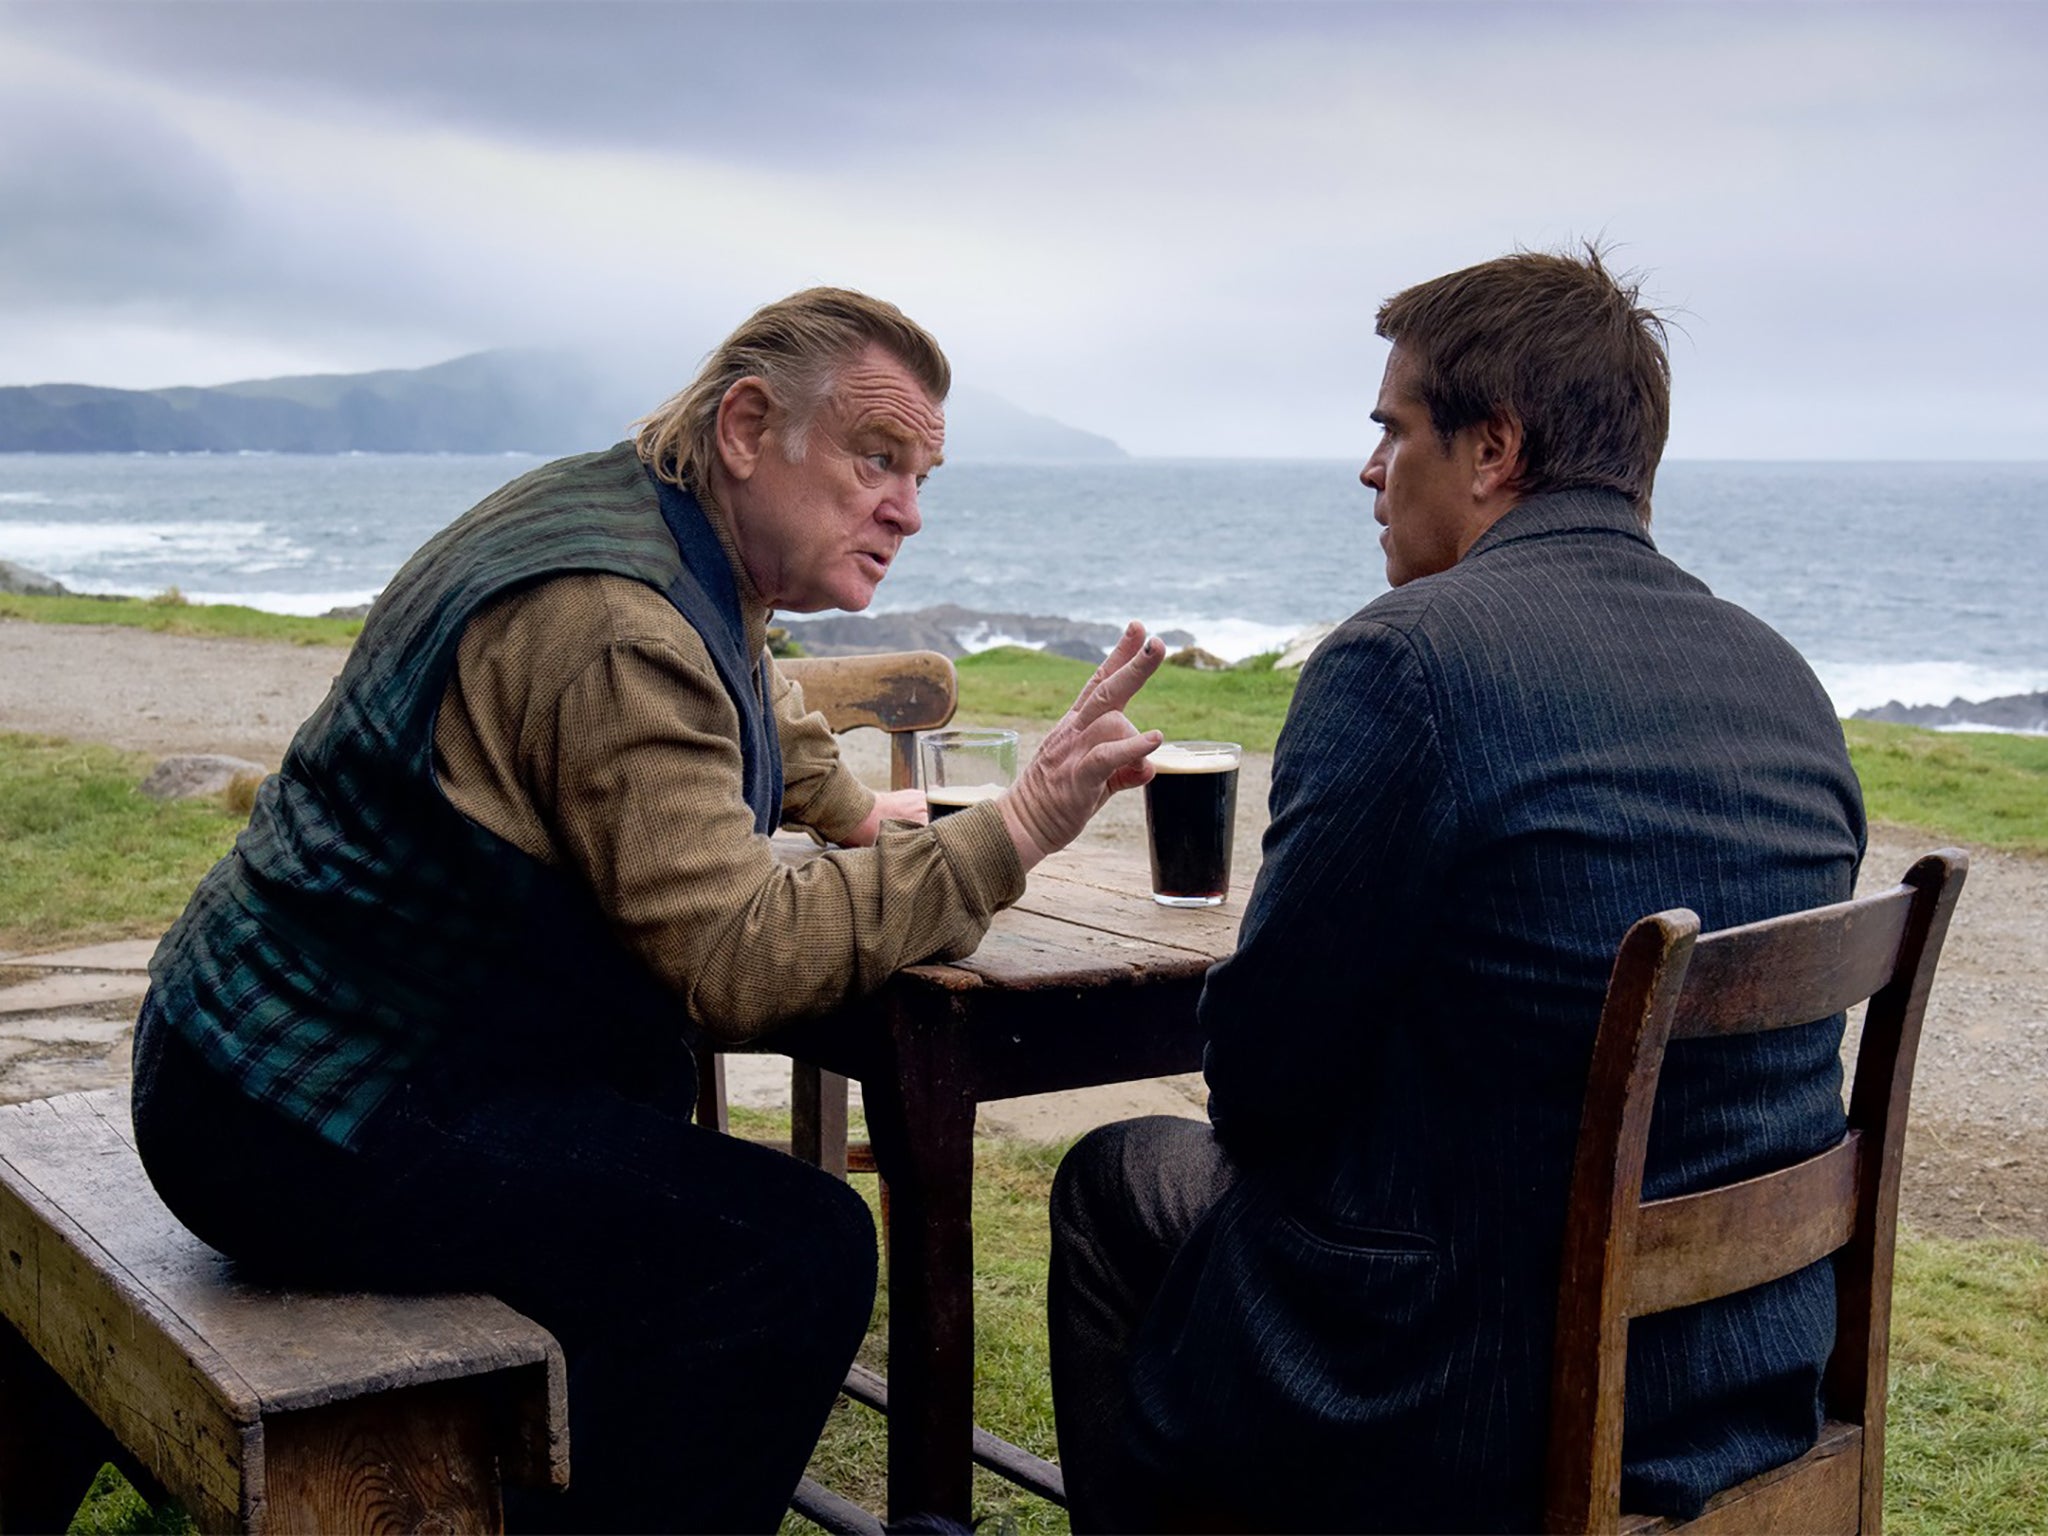 Brendan Gleeson and Colin Farrell in ‘The Banshees of Inisherin'